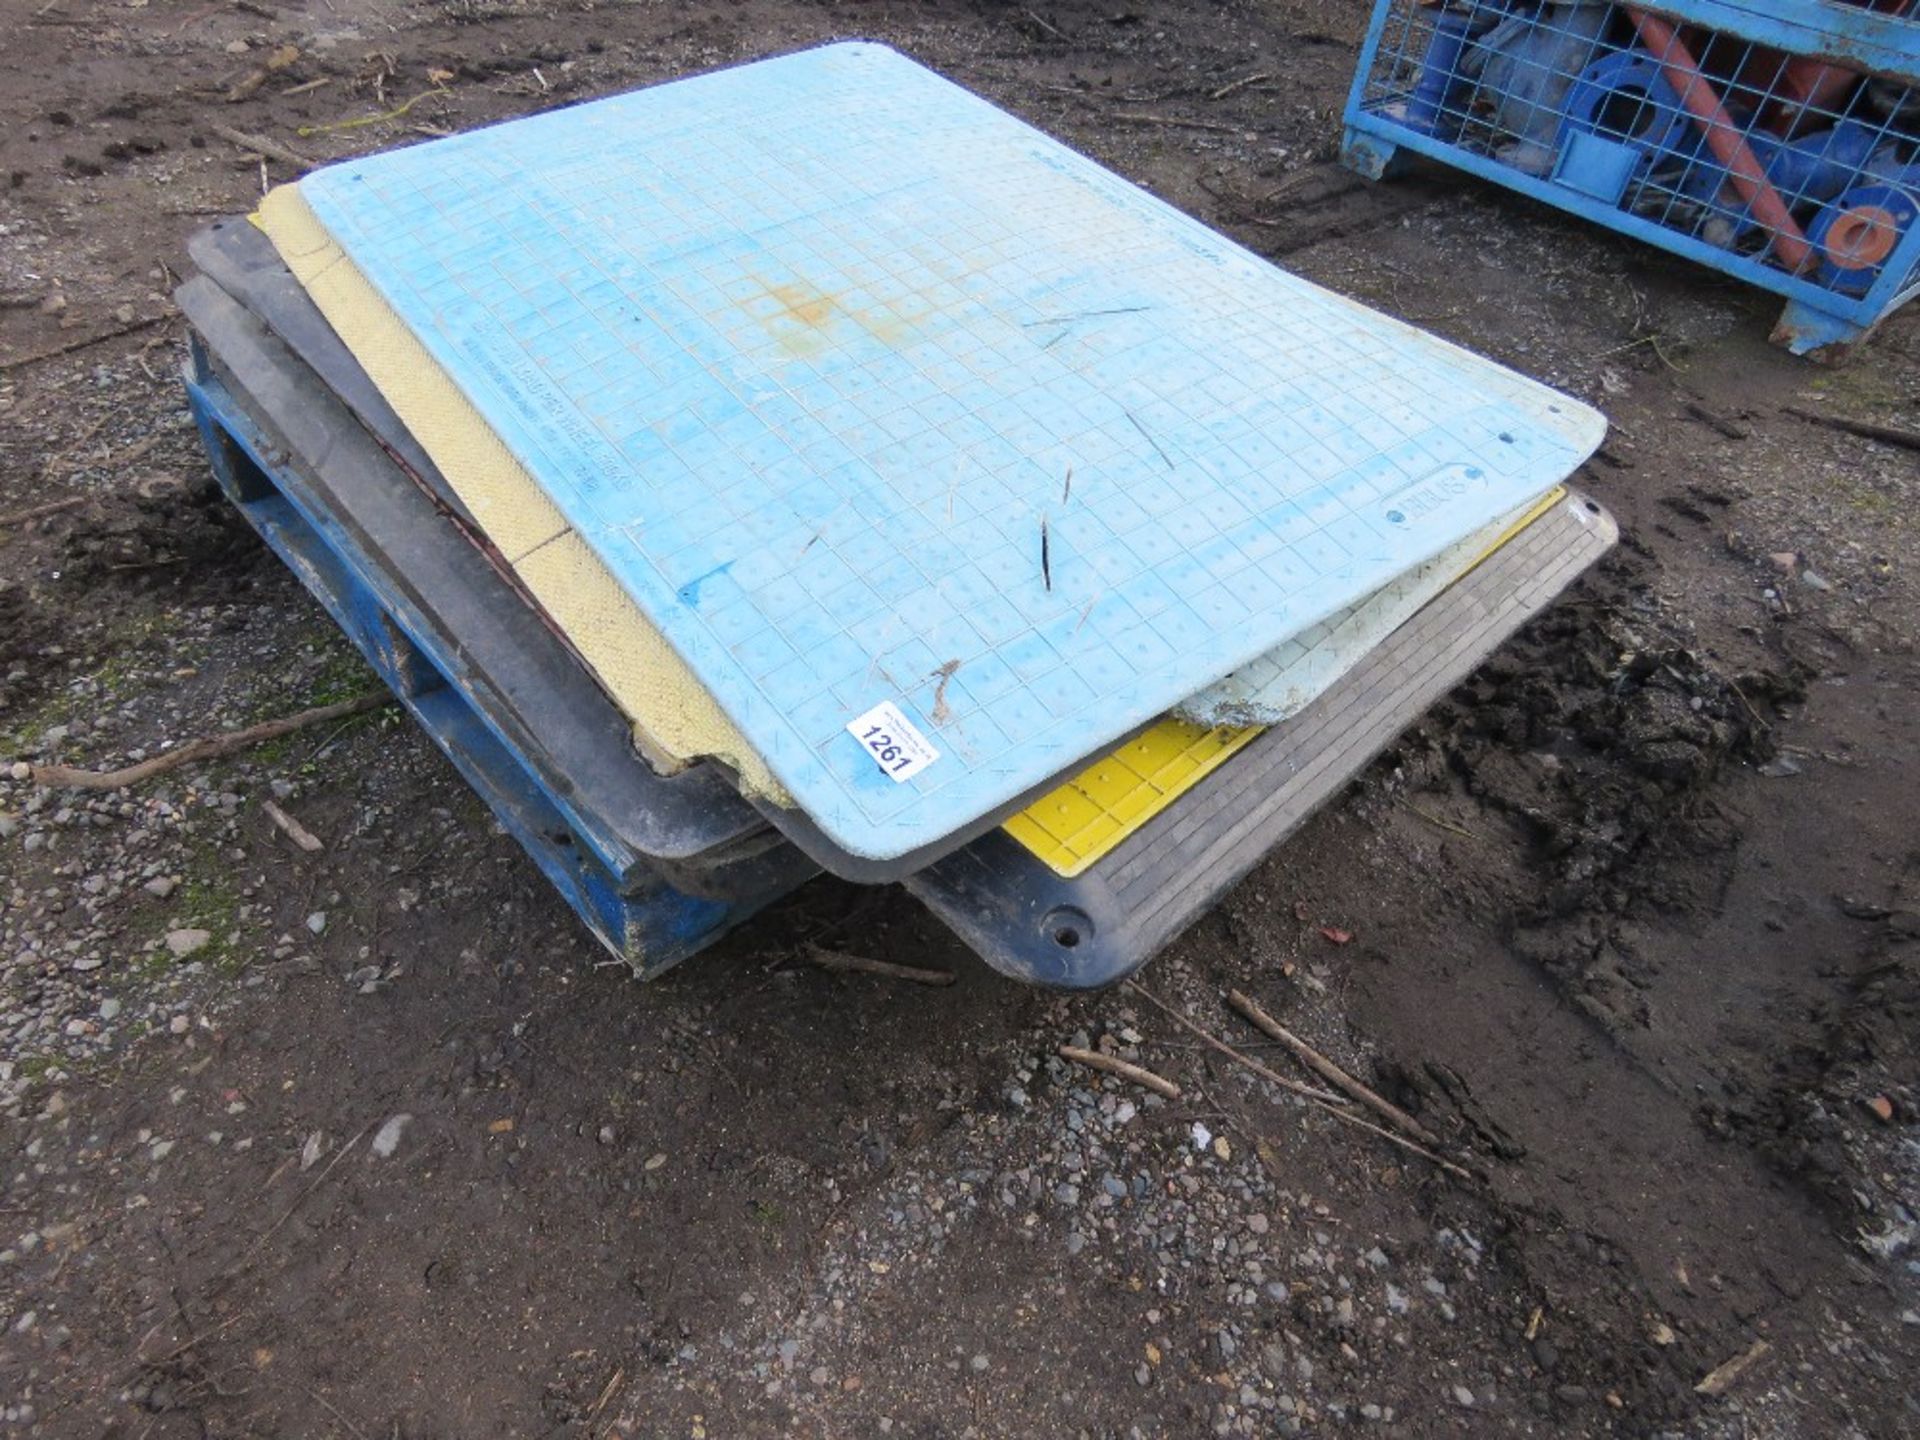 10NO GRP MANHOLE CROSSING PLATES. SOURCED FROM COMPANY LIQUIDATION.